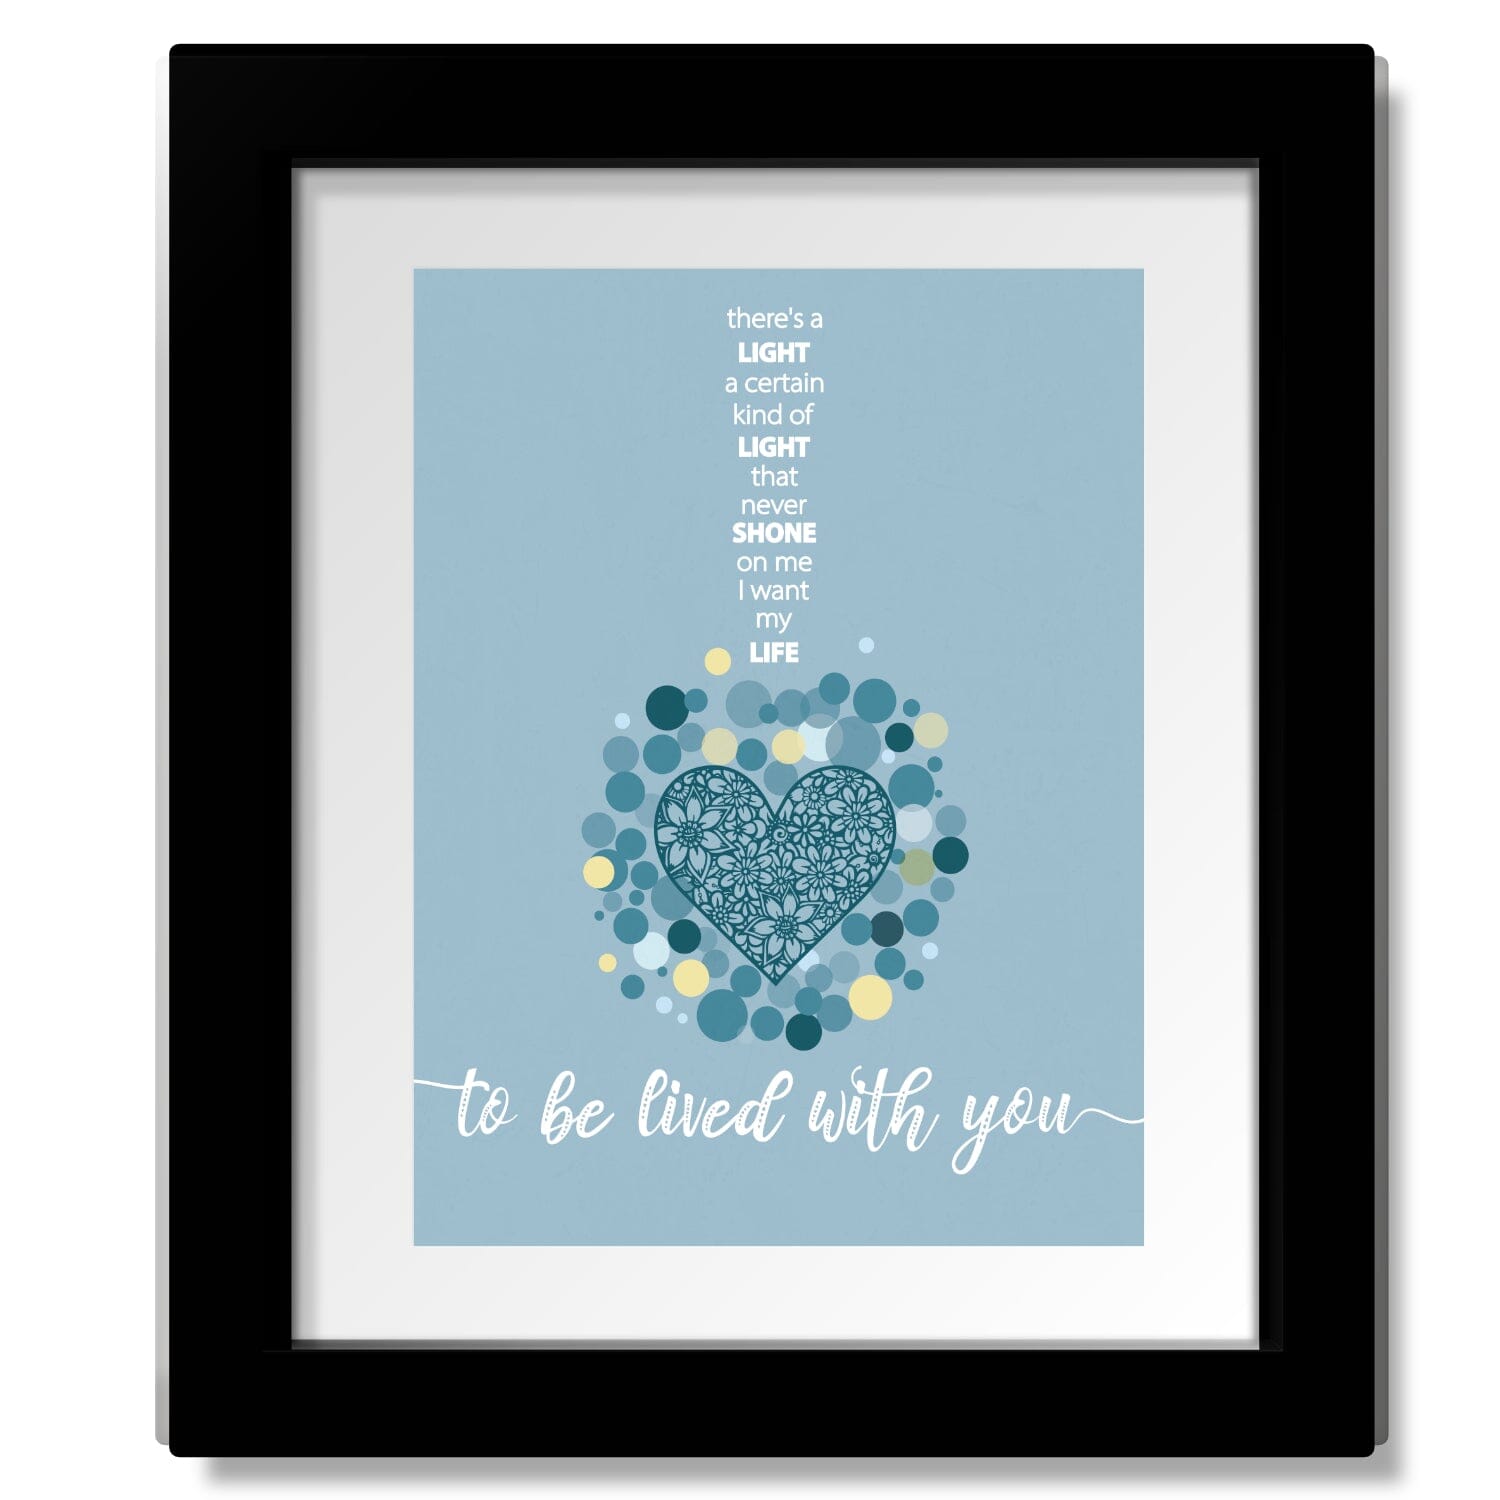 To Love Somebody by the Bee Gees - 60s Song Lyric Art Print Song Lyrics Art Song Lyrics Art 8x10 Framed and Matted Print 